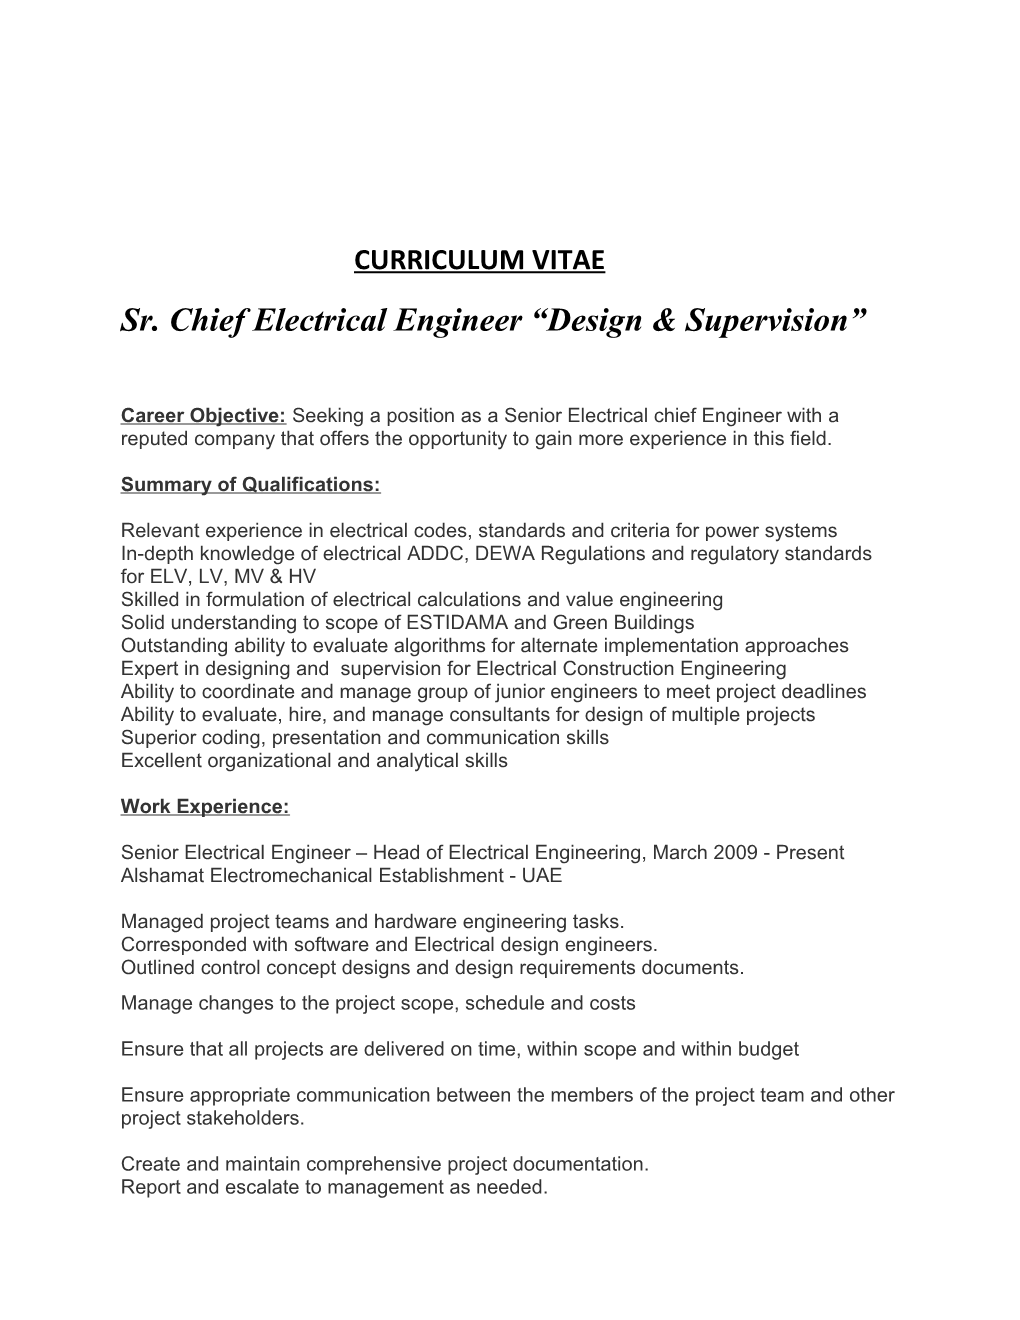 Sr. Chief Electrical Engineer Design & Supervision